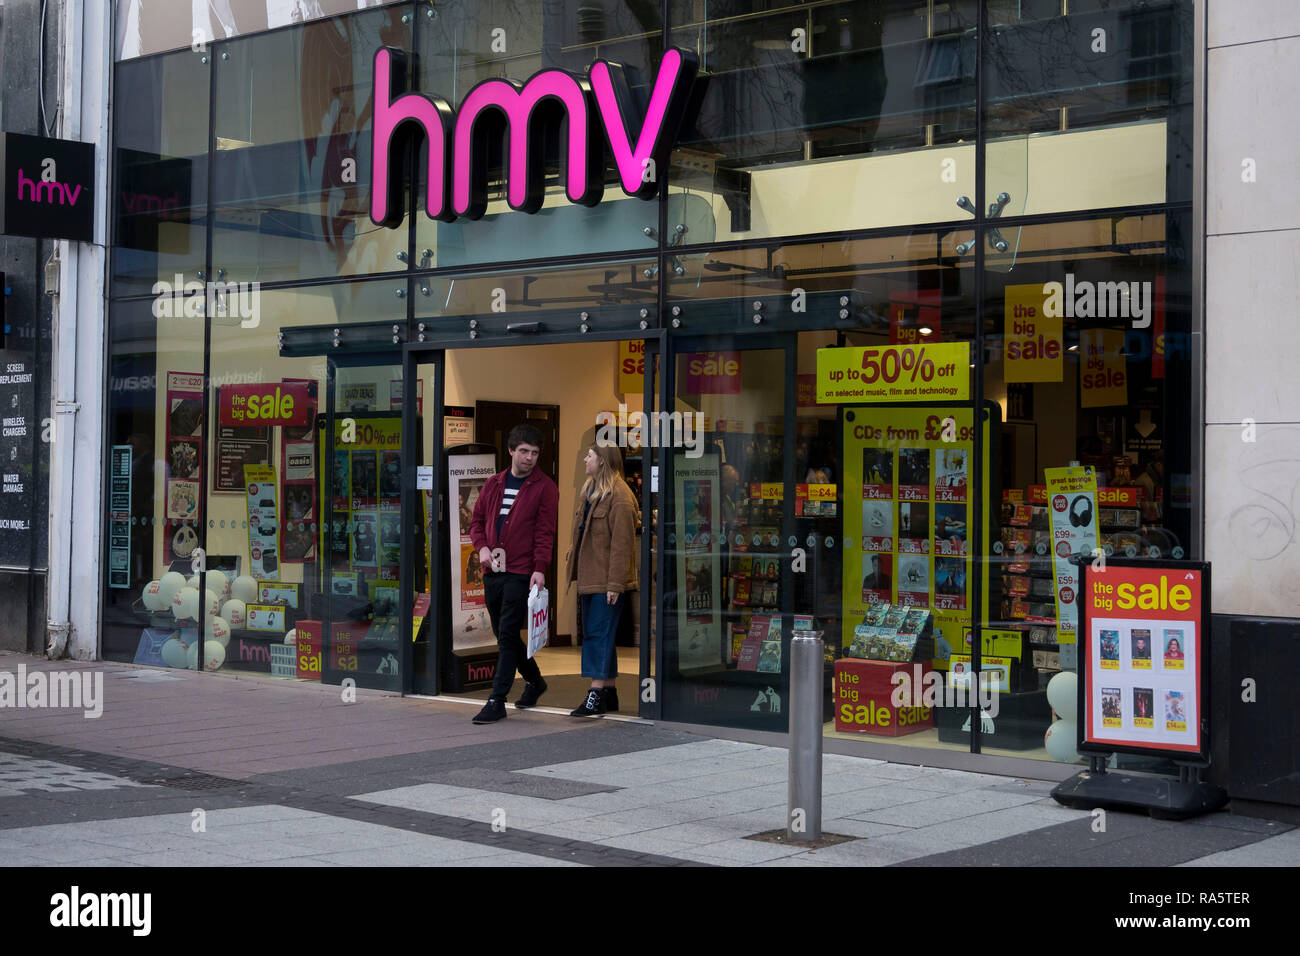 A HMV sign in Cardiff, Wales, UK. The retailer has gone into administration for the second time in six years. Stock Photo